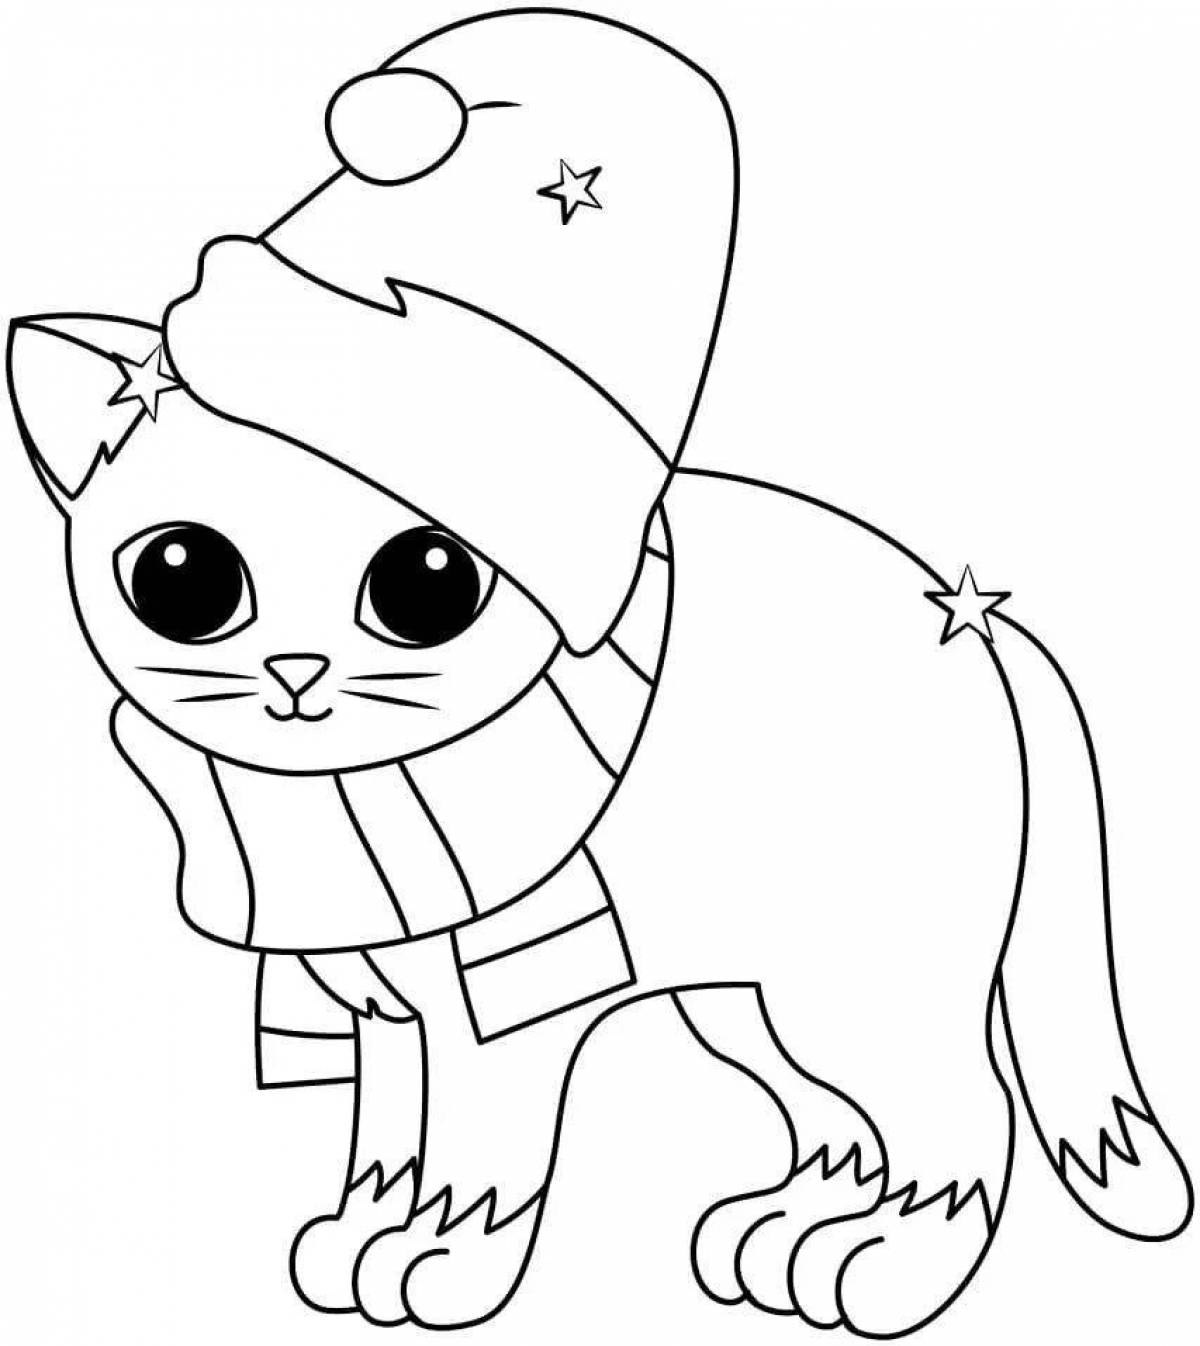 Coloring page bright christmas cats